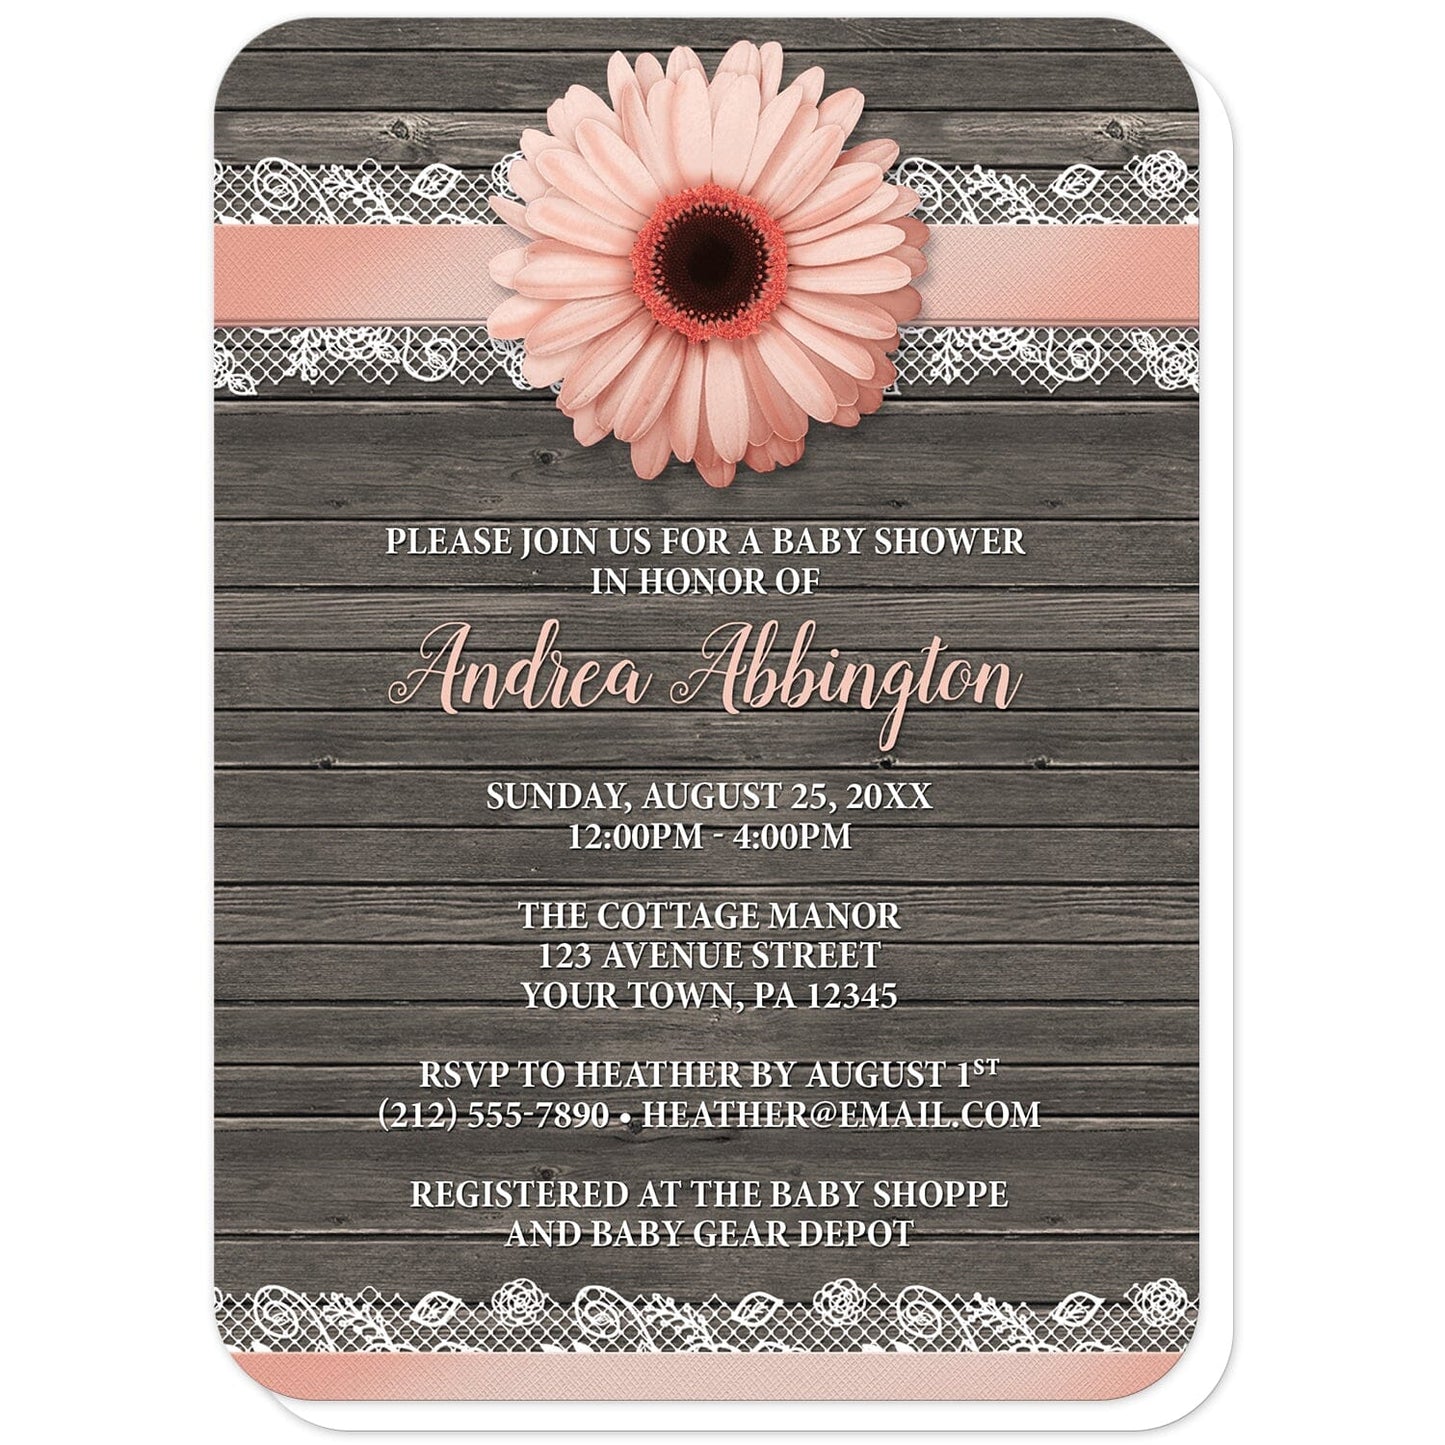 Peach Daisy Lace Rustic Wood Baby Shower Invitations (with rounded corners) at Artistically Invited. Peach daisy lace rustic wood baby shower invitations with a peach daisy flower centered at the top on a peach and white lace ribbon illustration, over a country brown wood background. Your personalized bridal shower celebration details are custom printed in peach and white over the rustic wood design. 